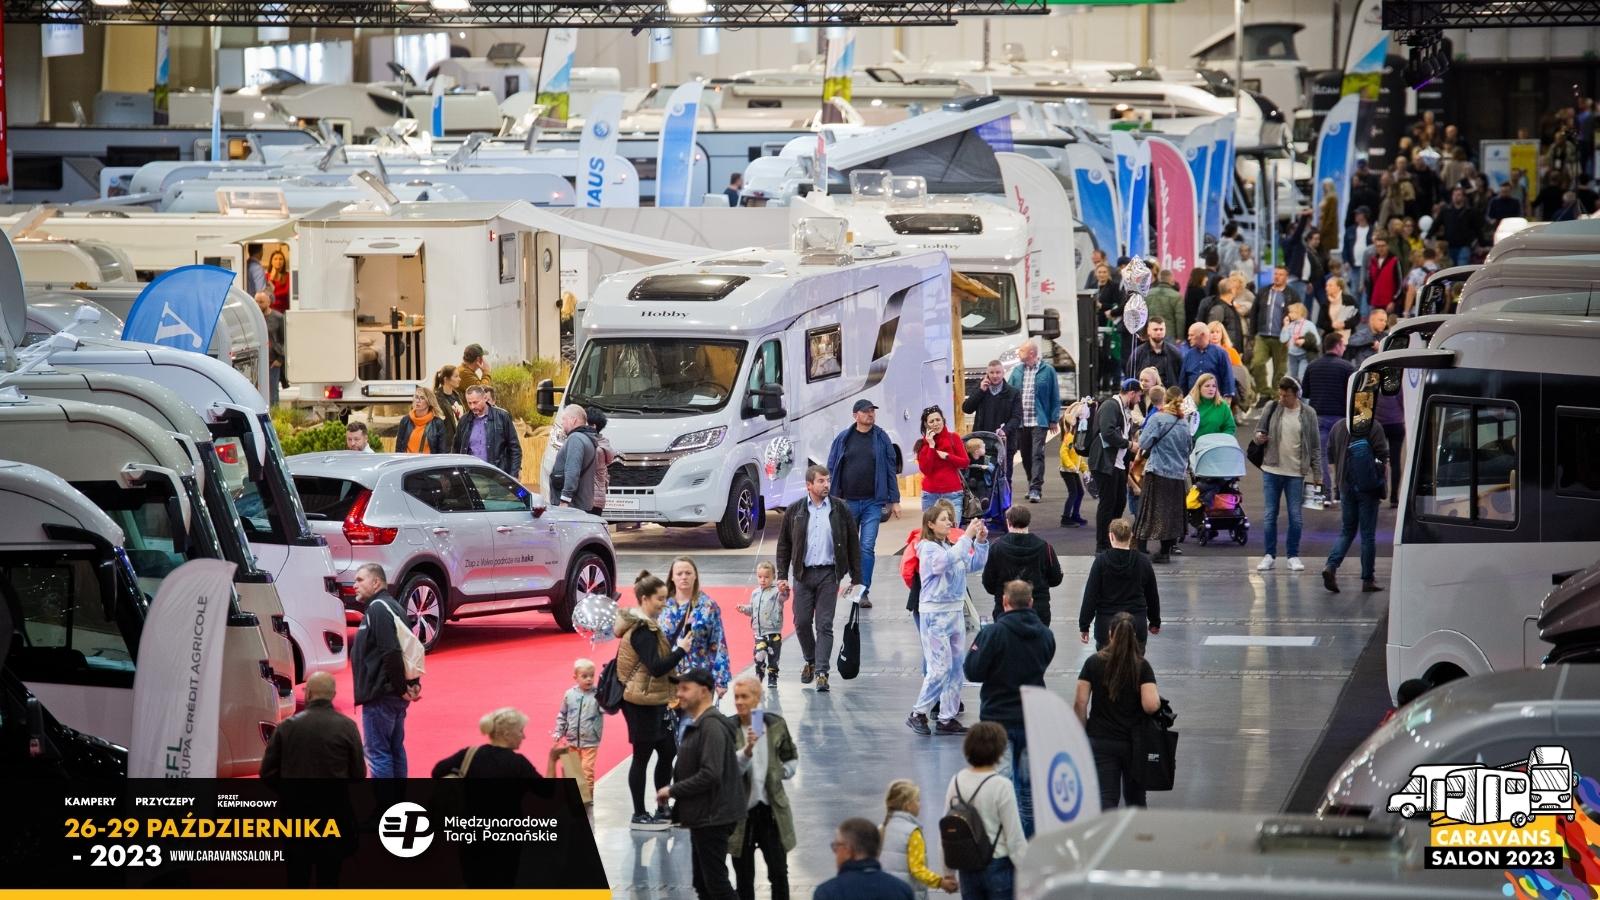 There are already over 80 exhibitors on the list of the Caravans Salon Poland fair in Poznań – main image